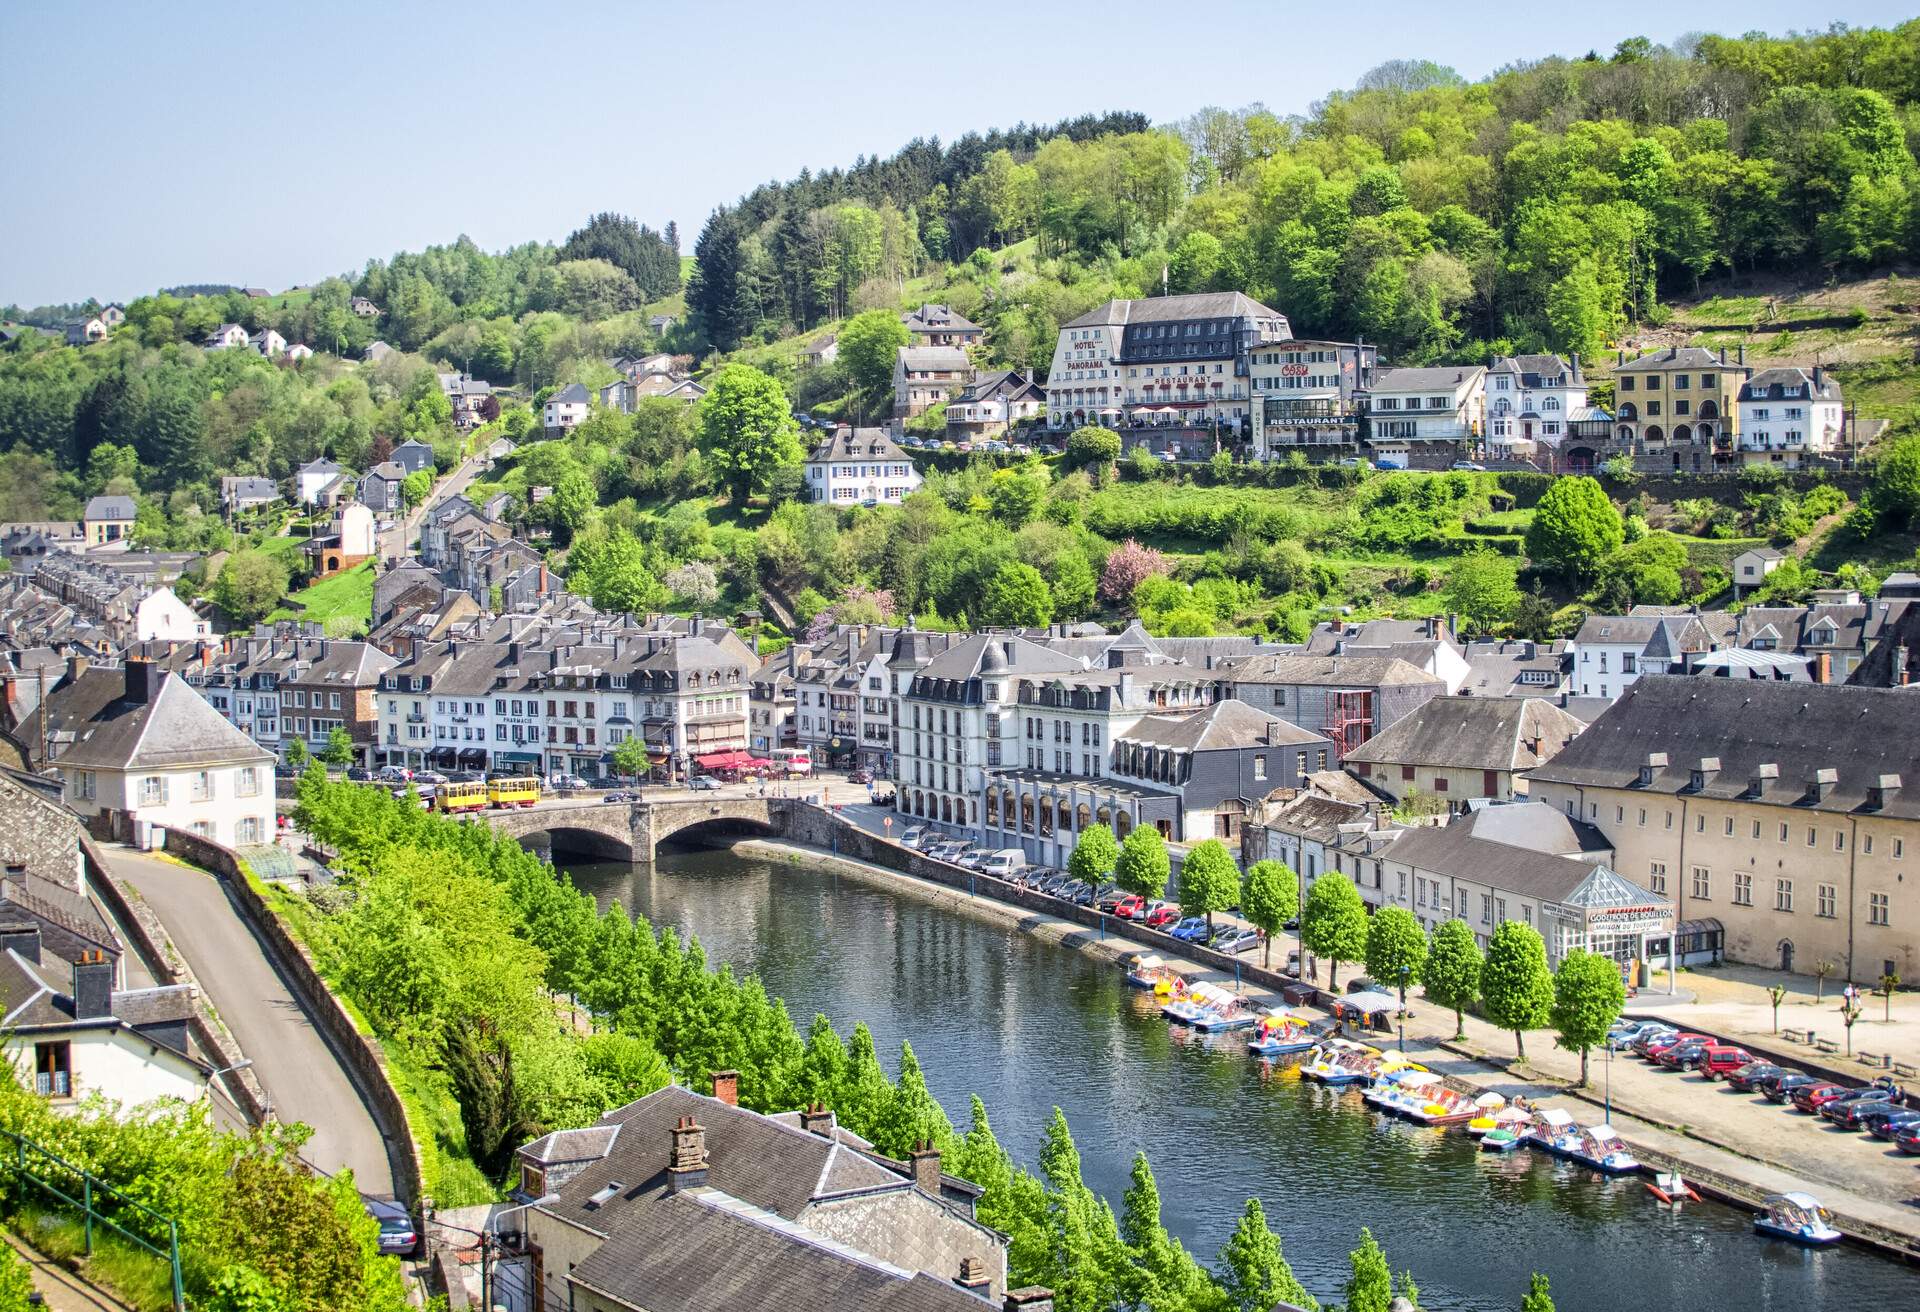 Bouillon a is a municipality in Belgium. It lies in the country's Walloon Region and Luxembourg Province.